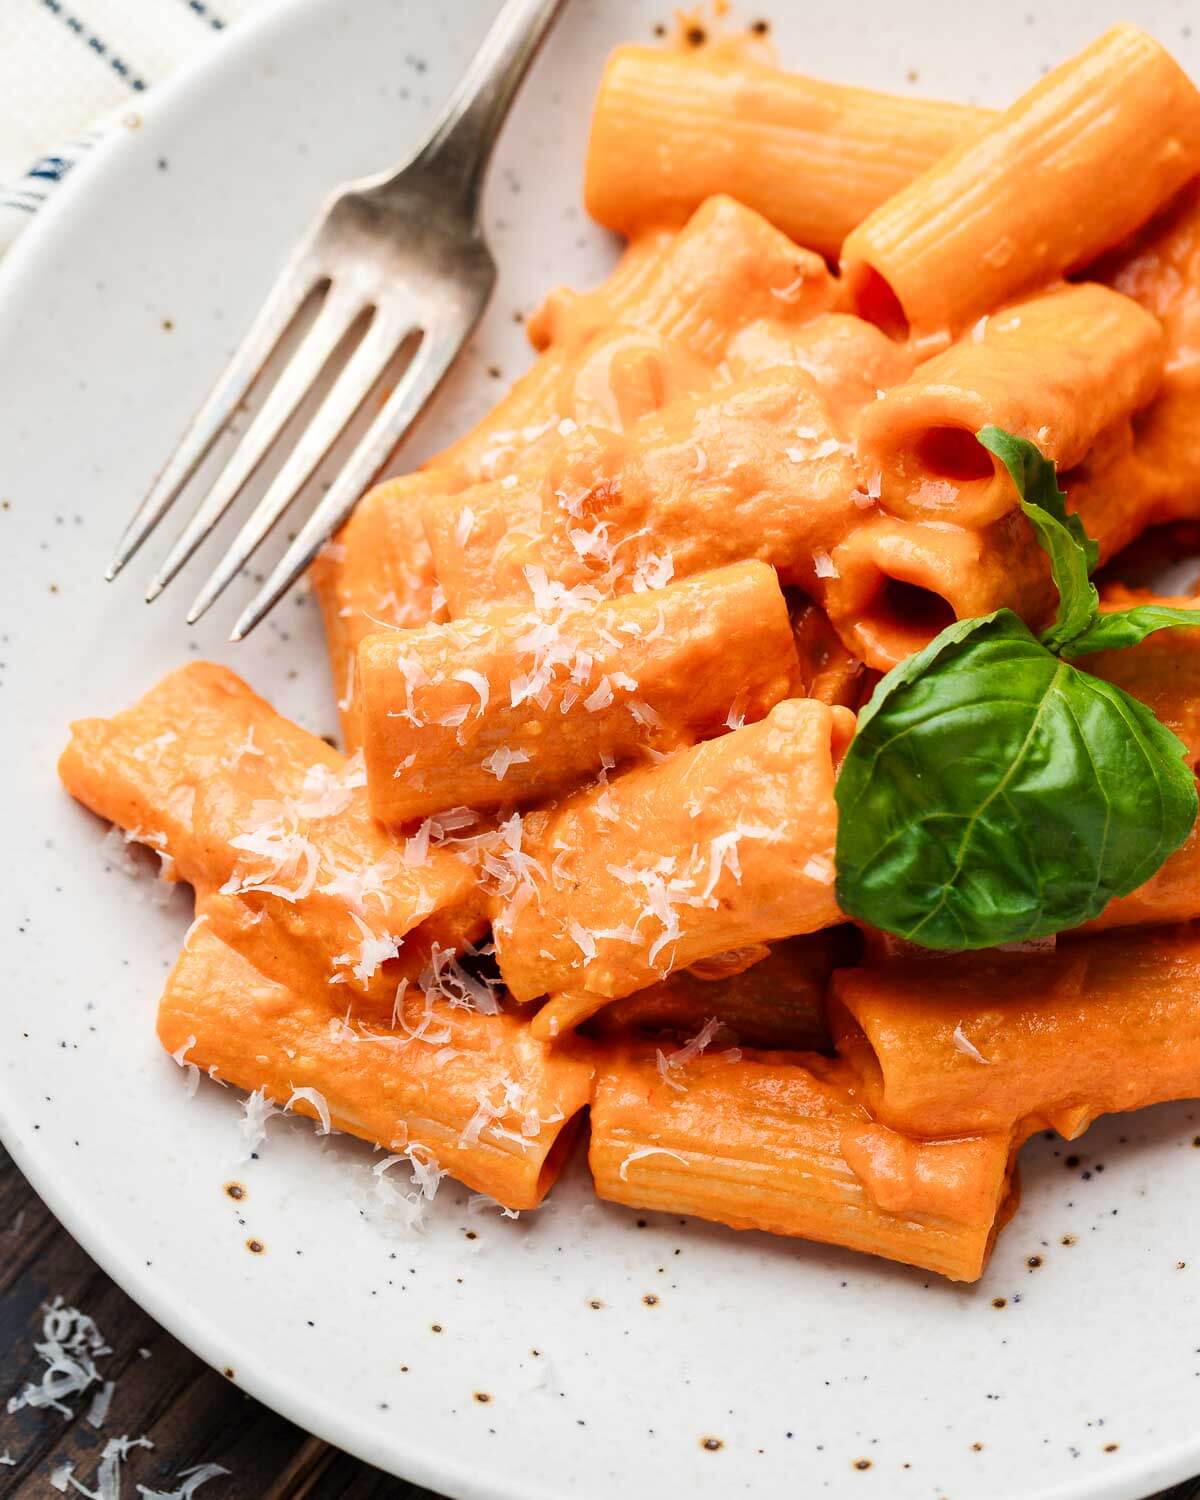 Rigatoni alla vodka in white plate with basil and grated cheese.